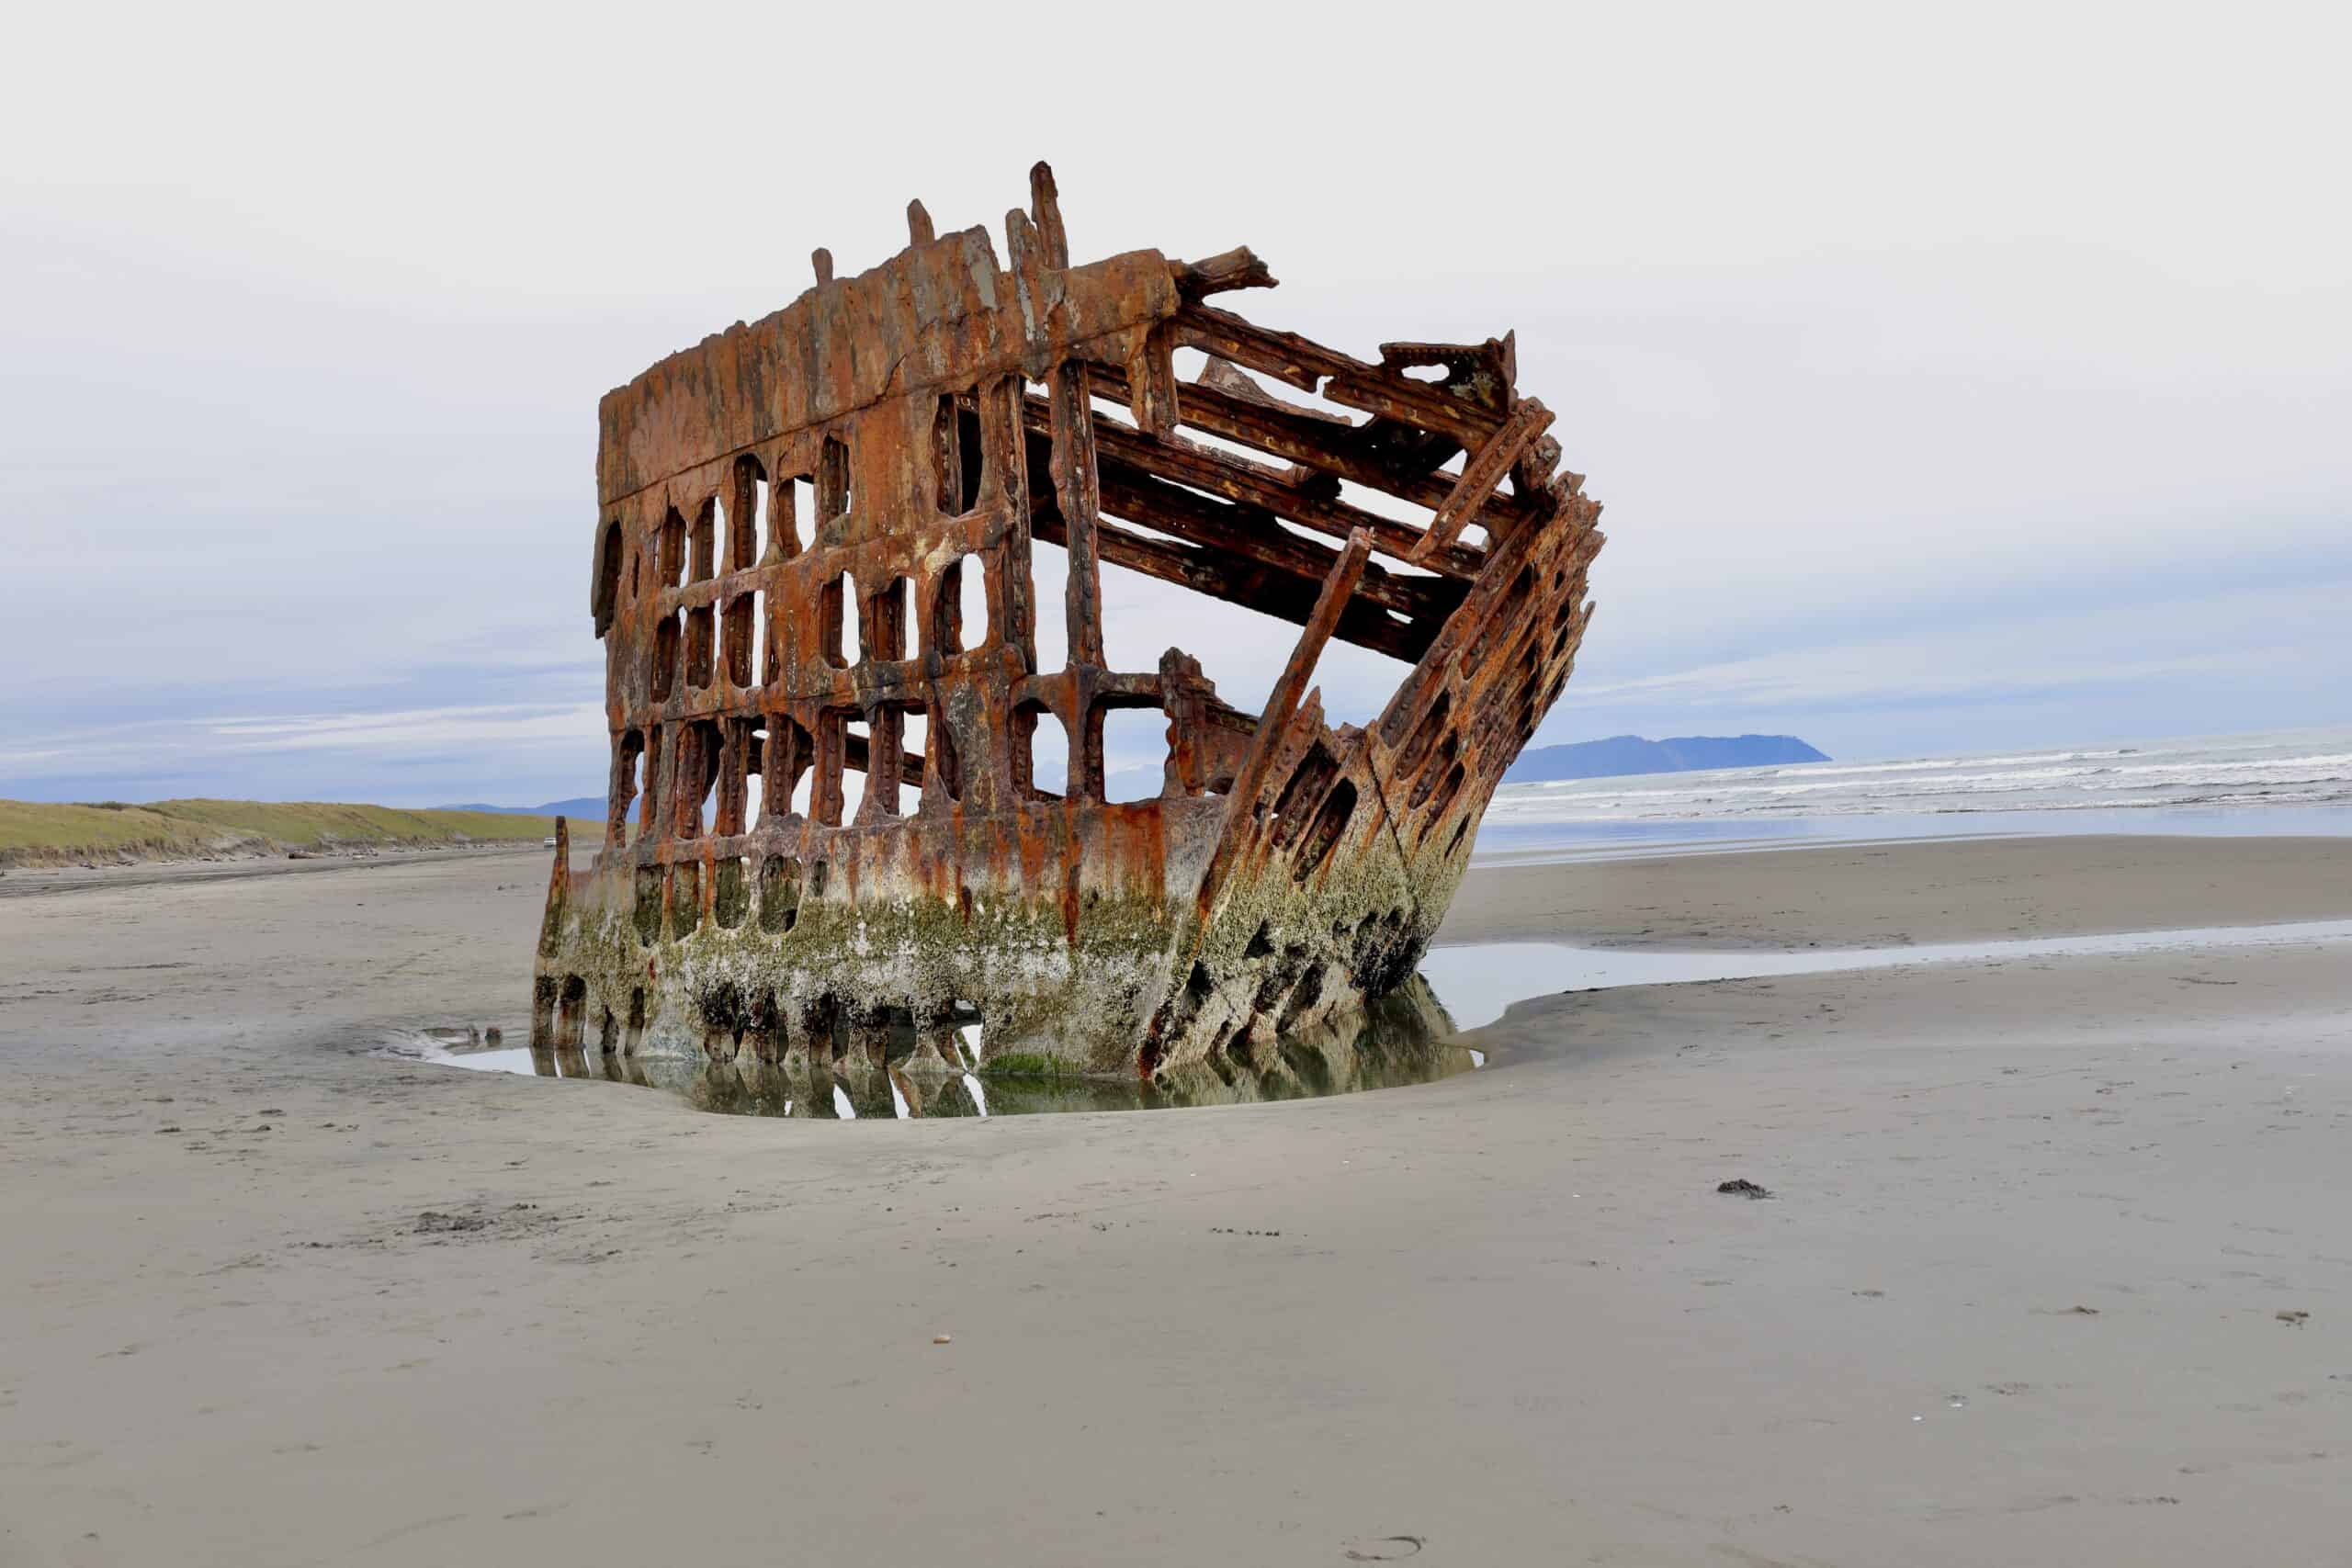 <p>There are several real-life shipwrecks on the Oregon coast, and the one that is most visible is the wreck of the Peter Iredale. The famous shipwreck happened in 1906, when the four-masted steel schooner ran aground, and the structure is still visible. It’s a cool site, and you can get up close and personal with this piece of history. Visit at low tide for the best experience.</p>